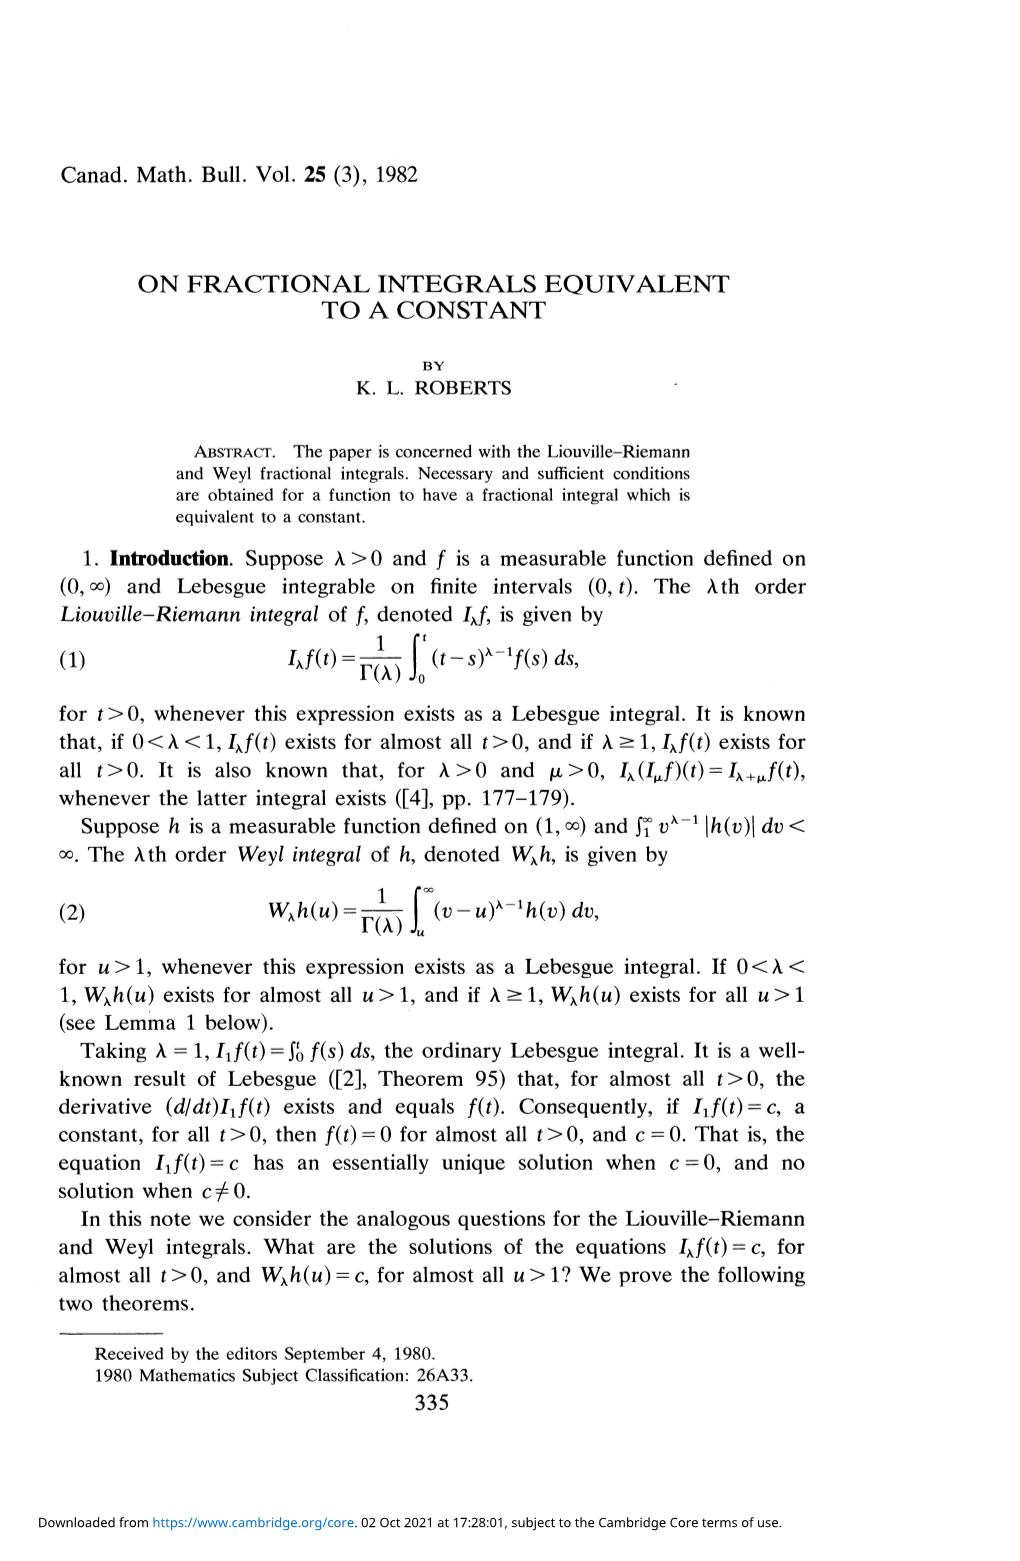 On Fractional Integrals Equivalent to a Constant